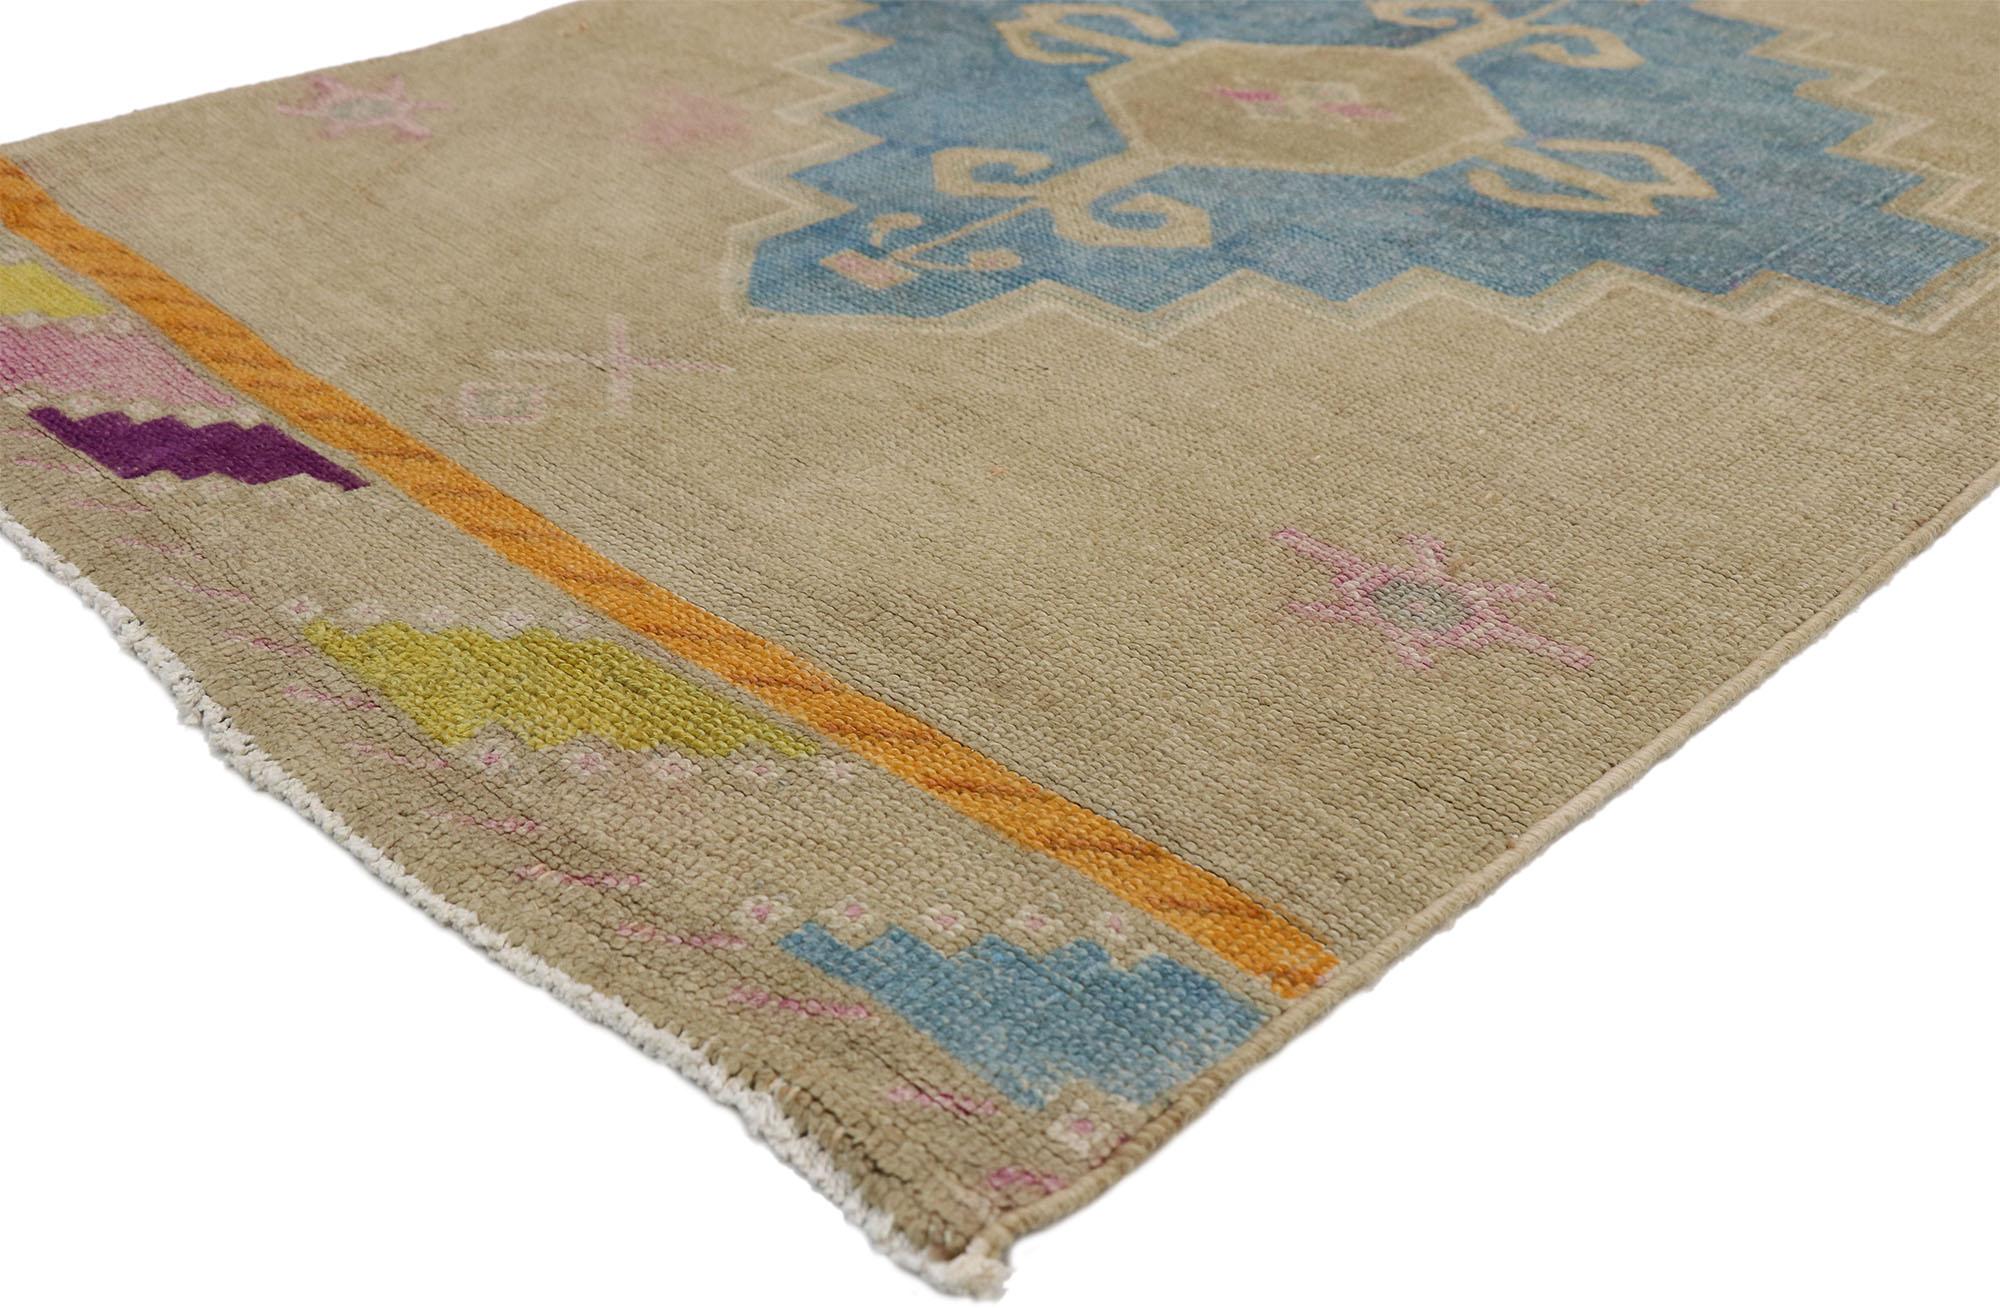 51841 Vintage Turkish Oushak Runner, 03’05 x 13’03. 
With a bold geometric form and retro flair, this hand knotted wool vintage Turkish Oushak runner astounds with its beauty. It features a geometric design composed of six stepped colorful amulets